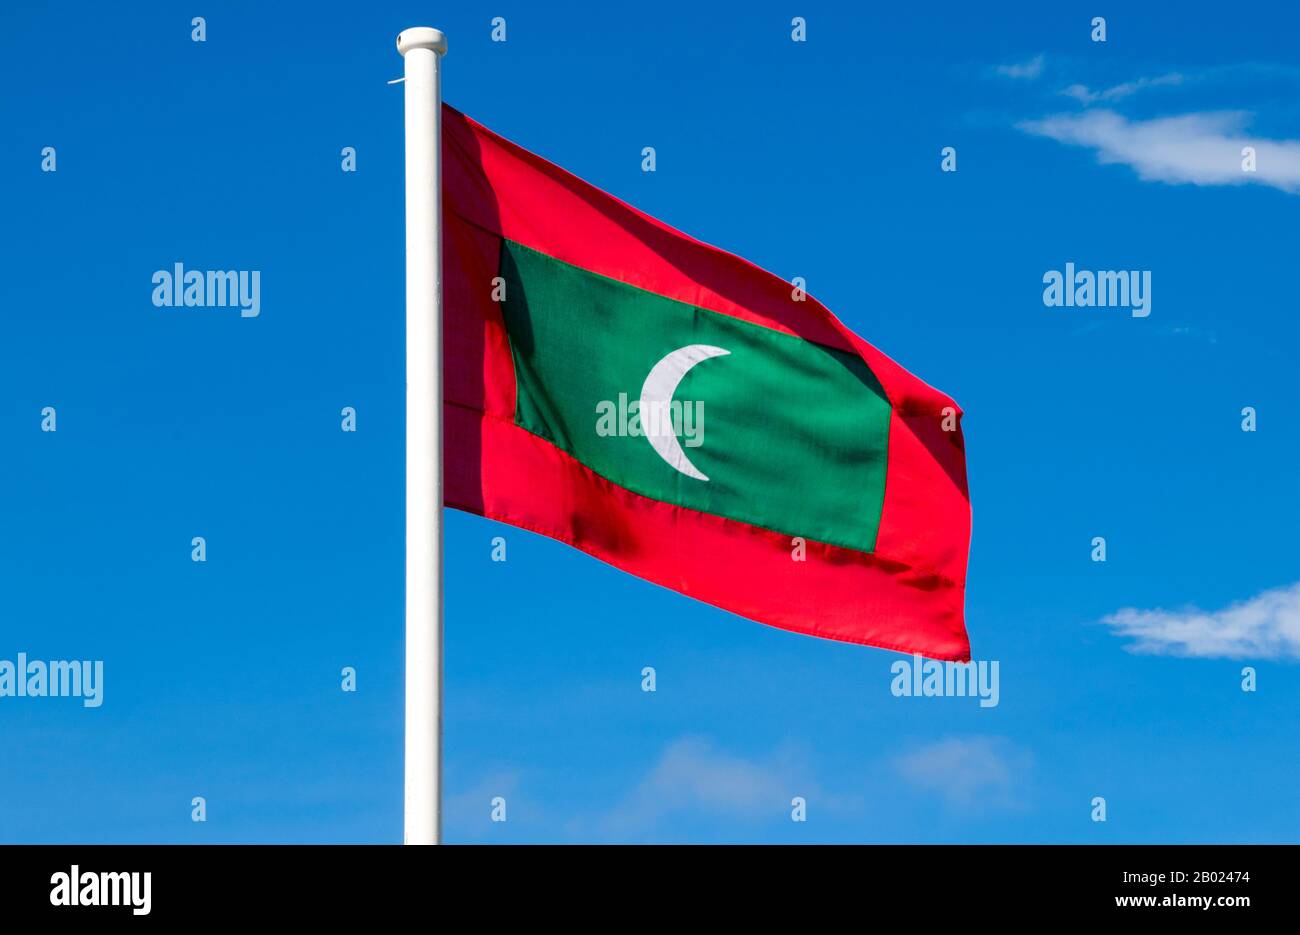 Maldives: Maldivian flag, Addu Atoll (Seenu Atoll). Asia's smallest and least-known nation, the Republic of Maldives, lies scattered from north to south across a 750-kilometre sweep of the Indian Ocean 500 kilometres south-west of Sri Lanka. More than 1000 islands, together with innumerable banks and reefs, are grouped in a chain of nineteen atolls which extends from a point due west of Colombo to just south of the equator.  The atolls, formed of great rings of coral based on the submarine Laccadive-Chagos ridge, vary greatly in size. Stock Photo